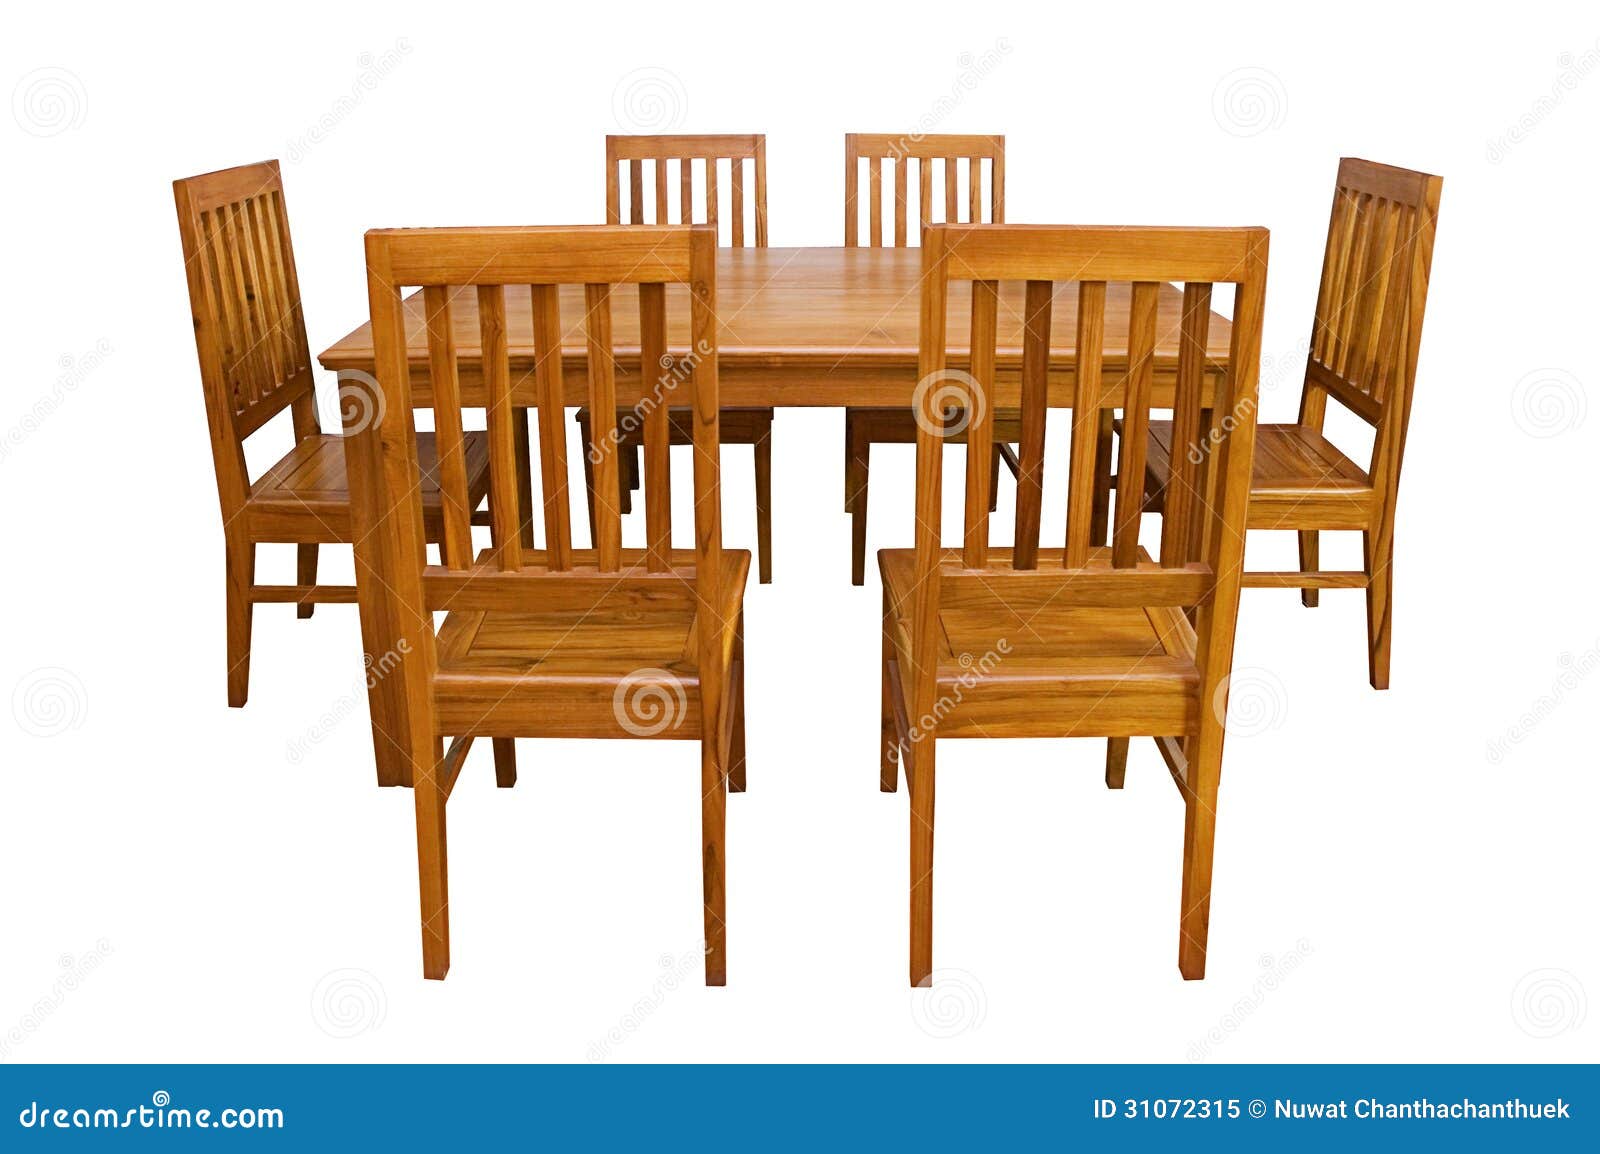 clipart dining room table - photo #50